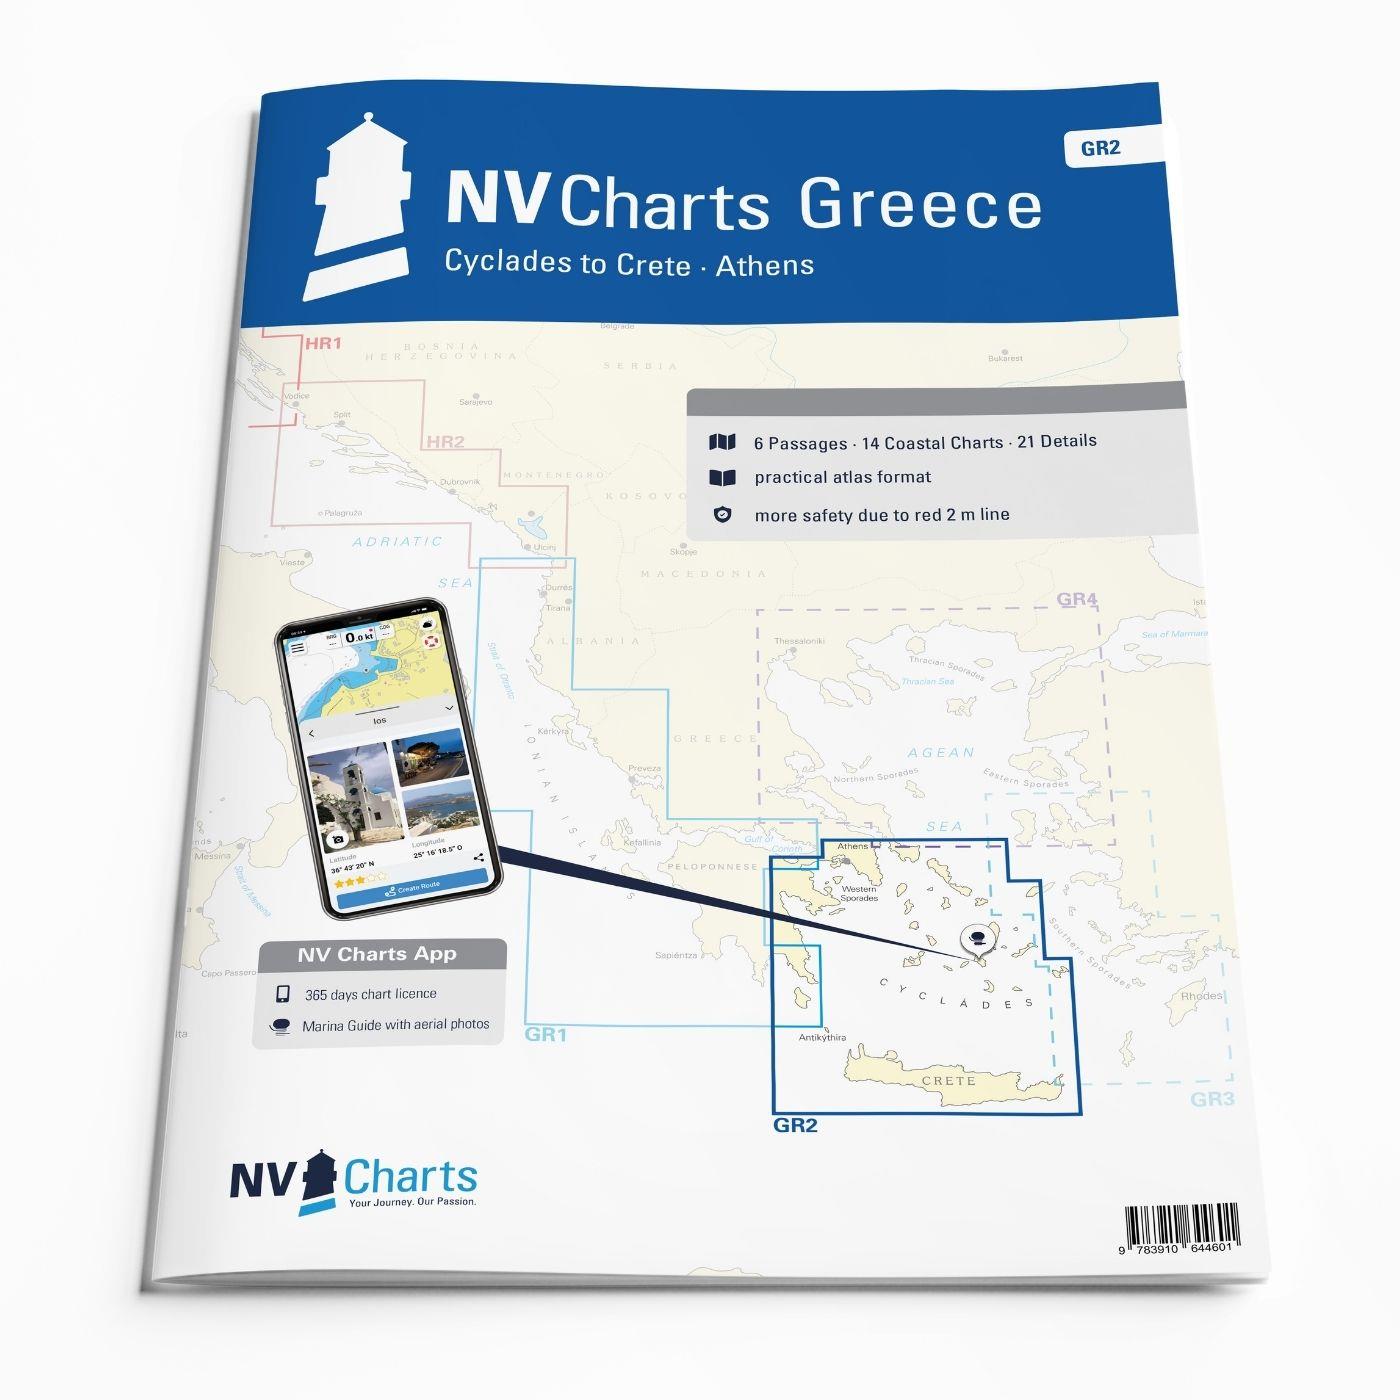 NV Charts Greece GR2 - Cyclades to Crete & Athens